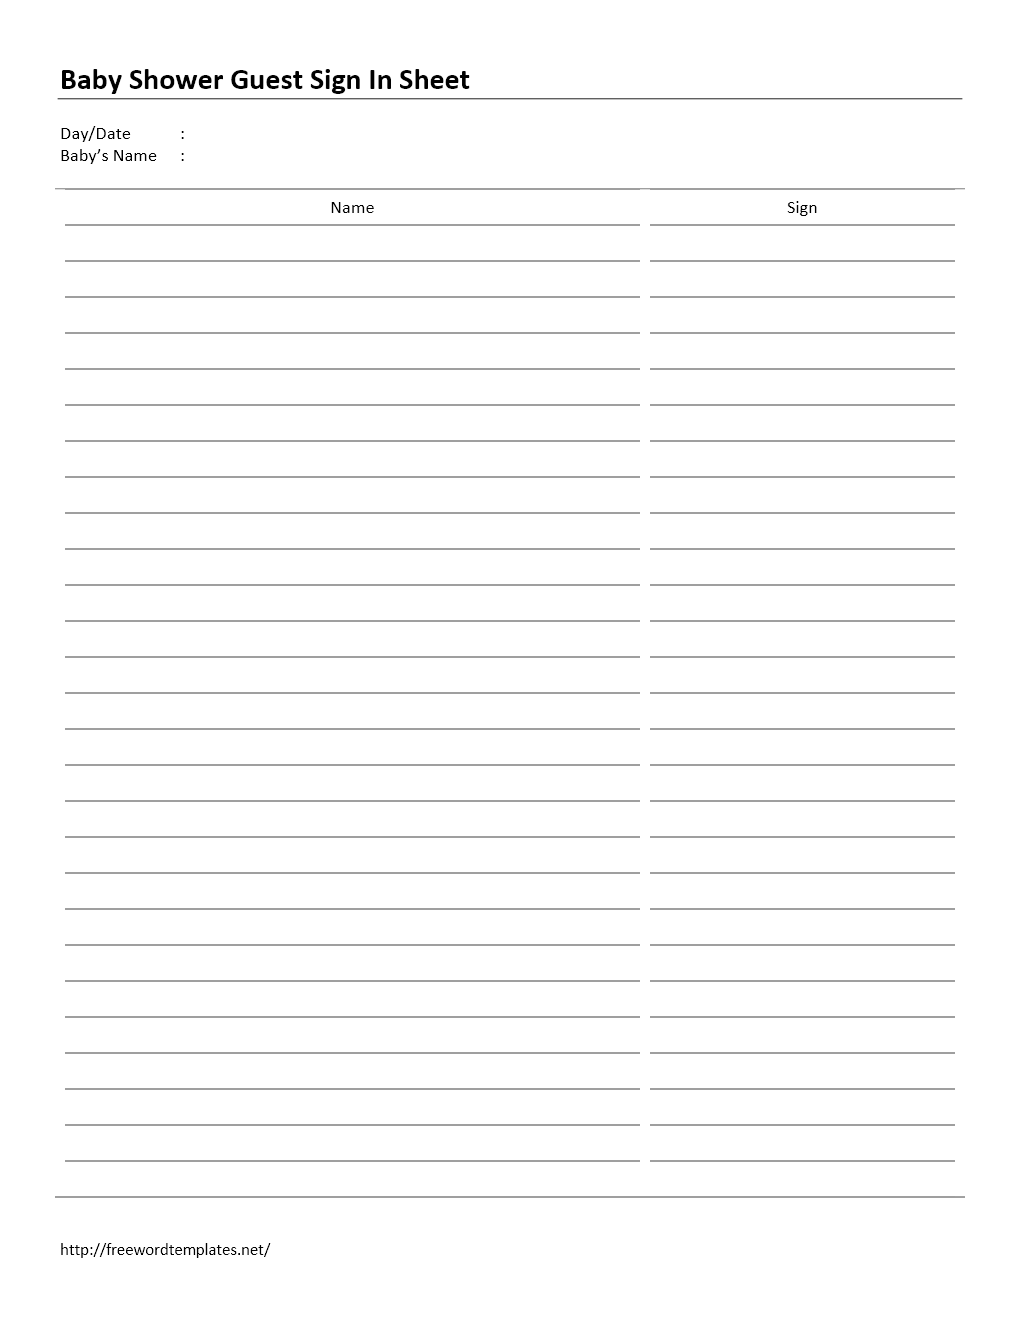 Sign In Sheet Templates For Microsoft Word